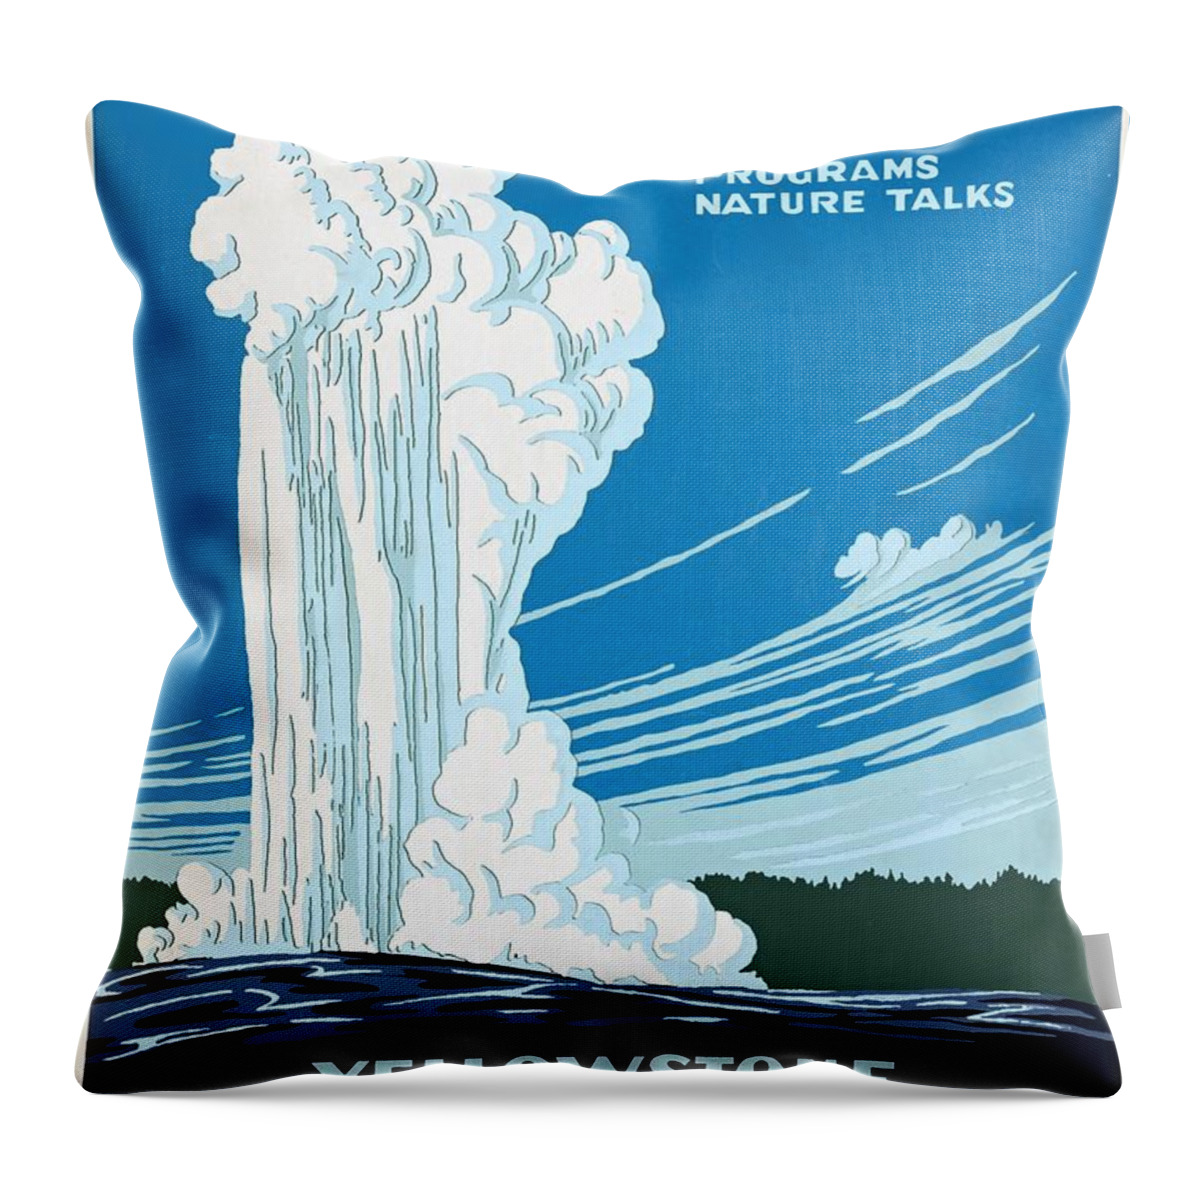 Yellowstone National Park Throw Pillow featuring the painting Old Faithful Yellowstone National Park poster ca 1938 by Vincent Monozlay